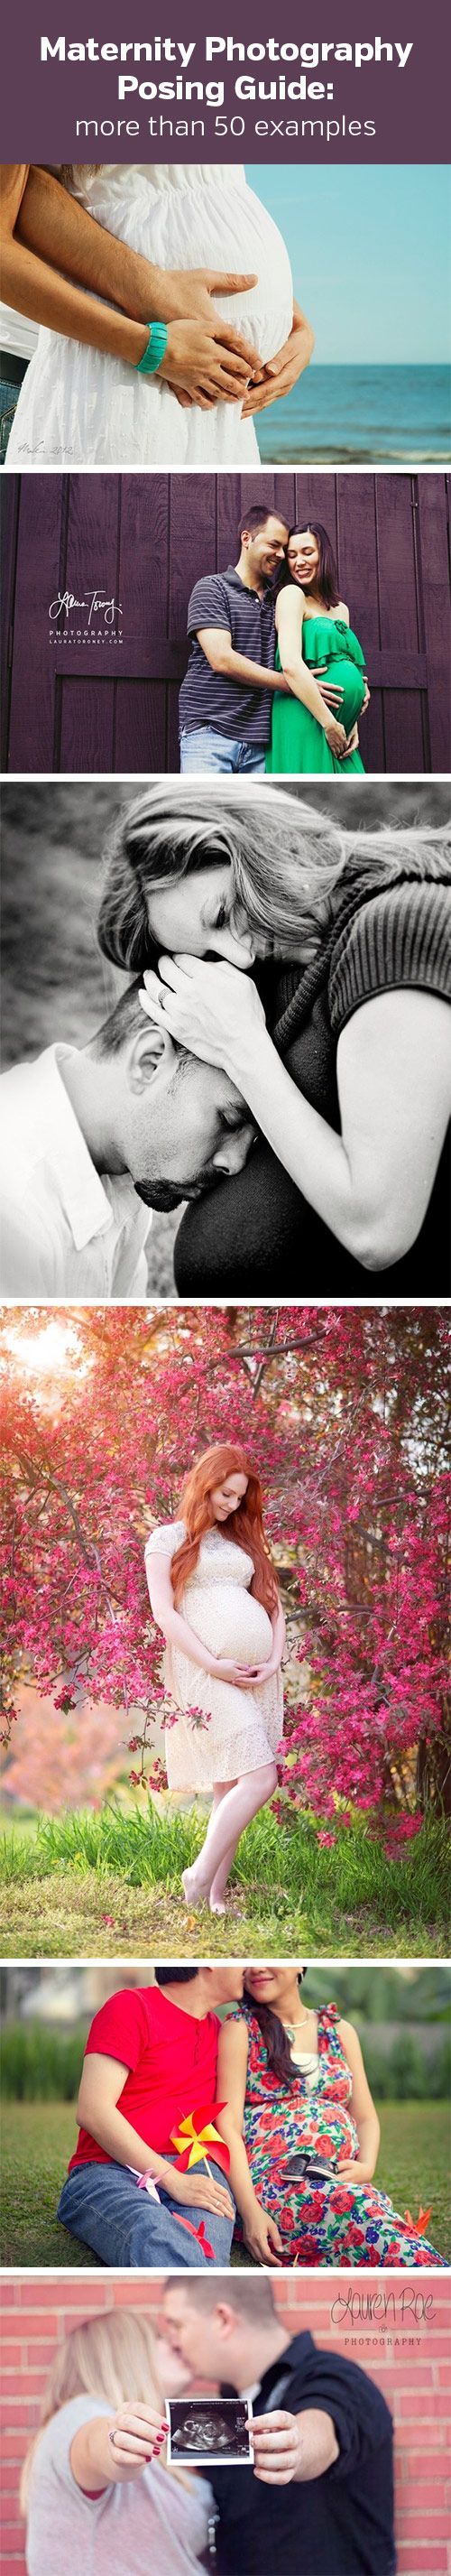 Maternity Photography Posing Guide – shows how to use more than 50 different poses for beautiful maternity photos.